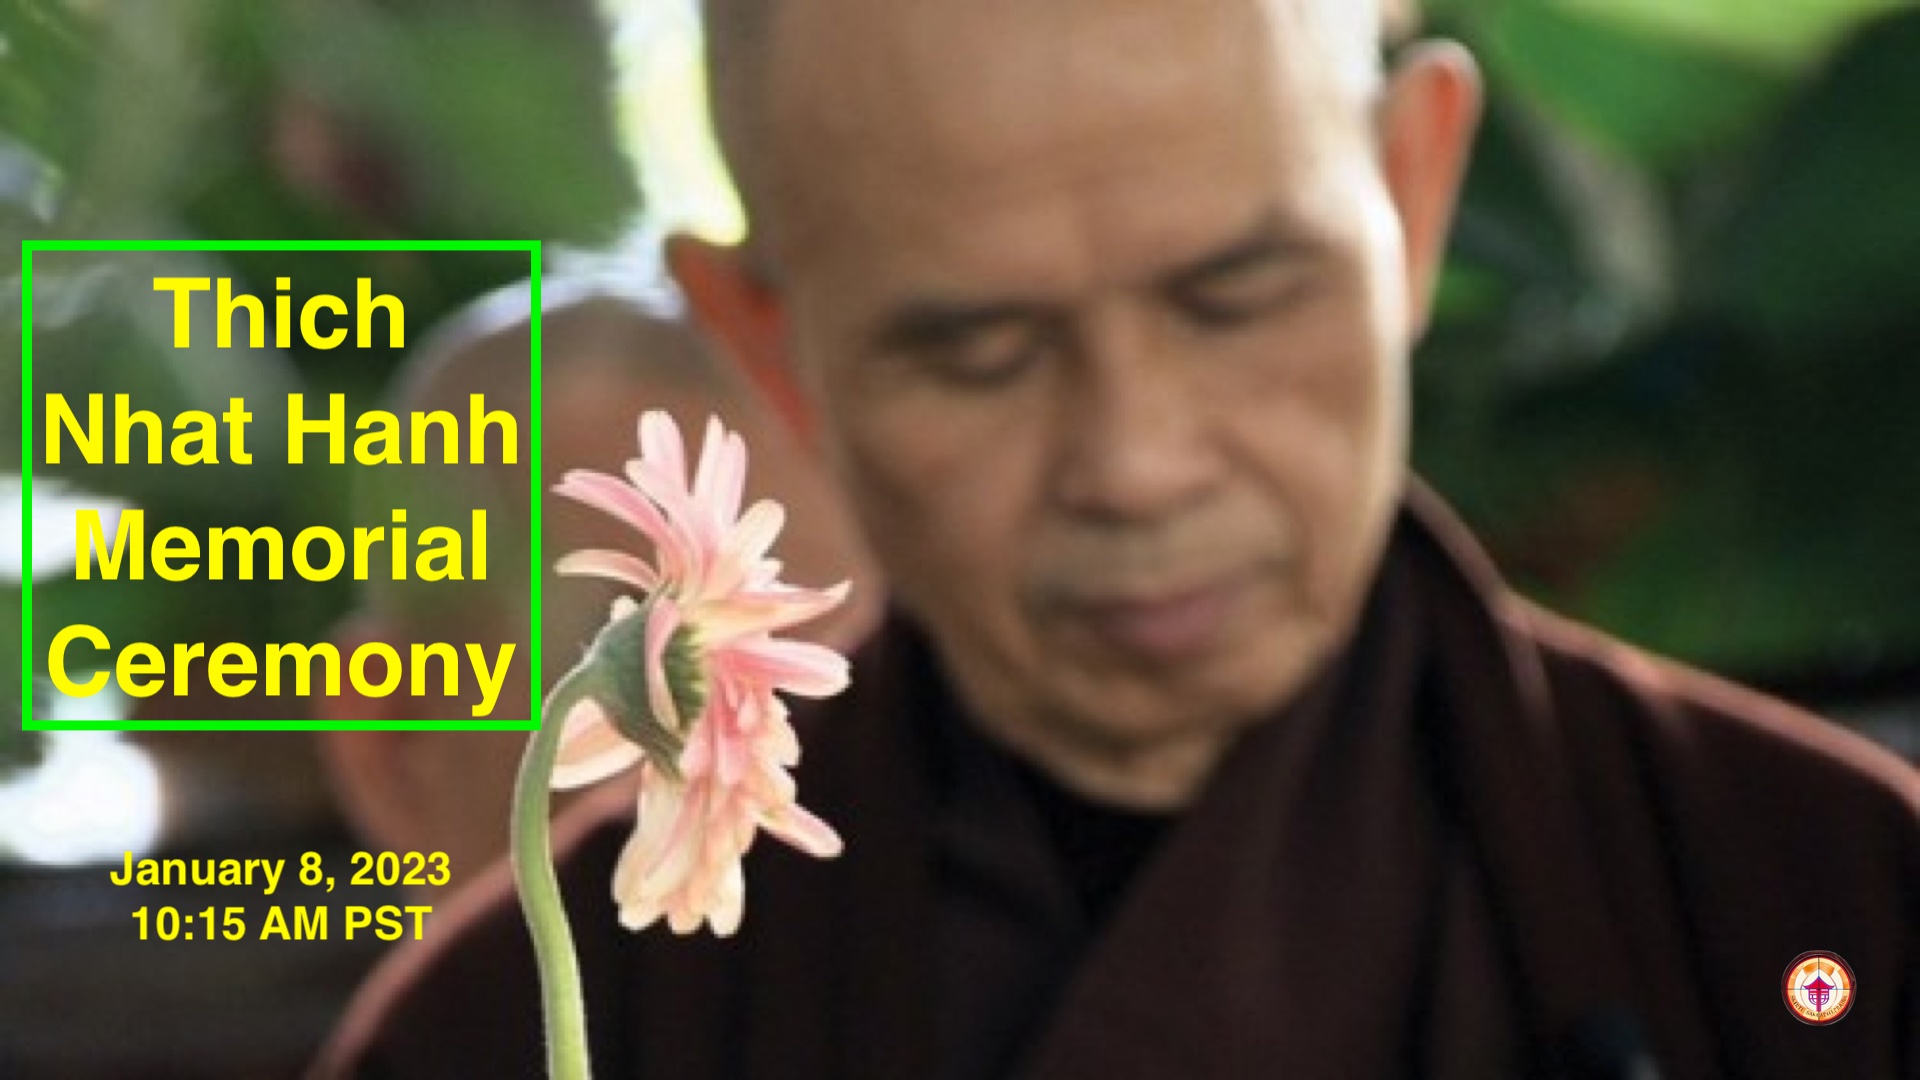 Thich Nhat Hanh Memorial Ceremony